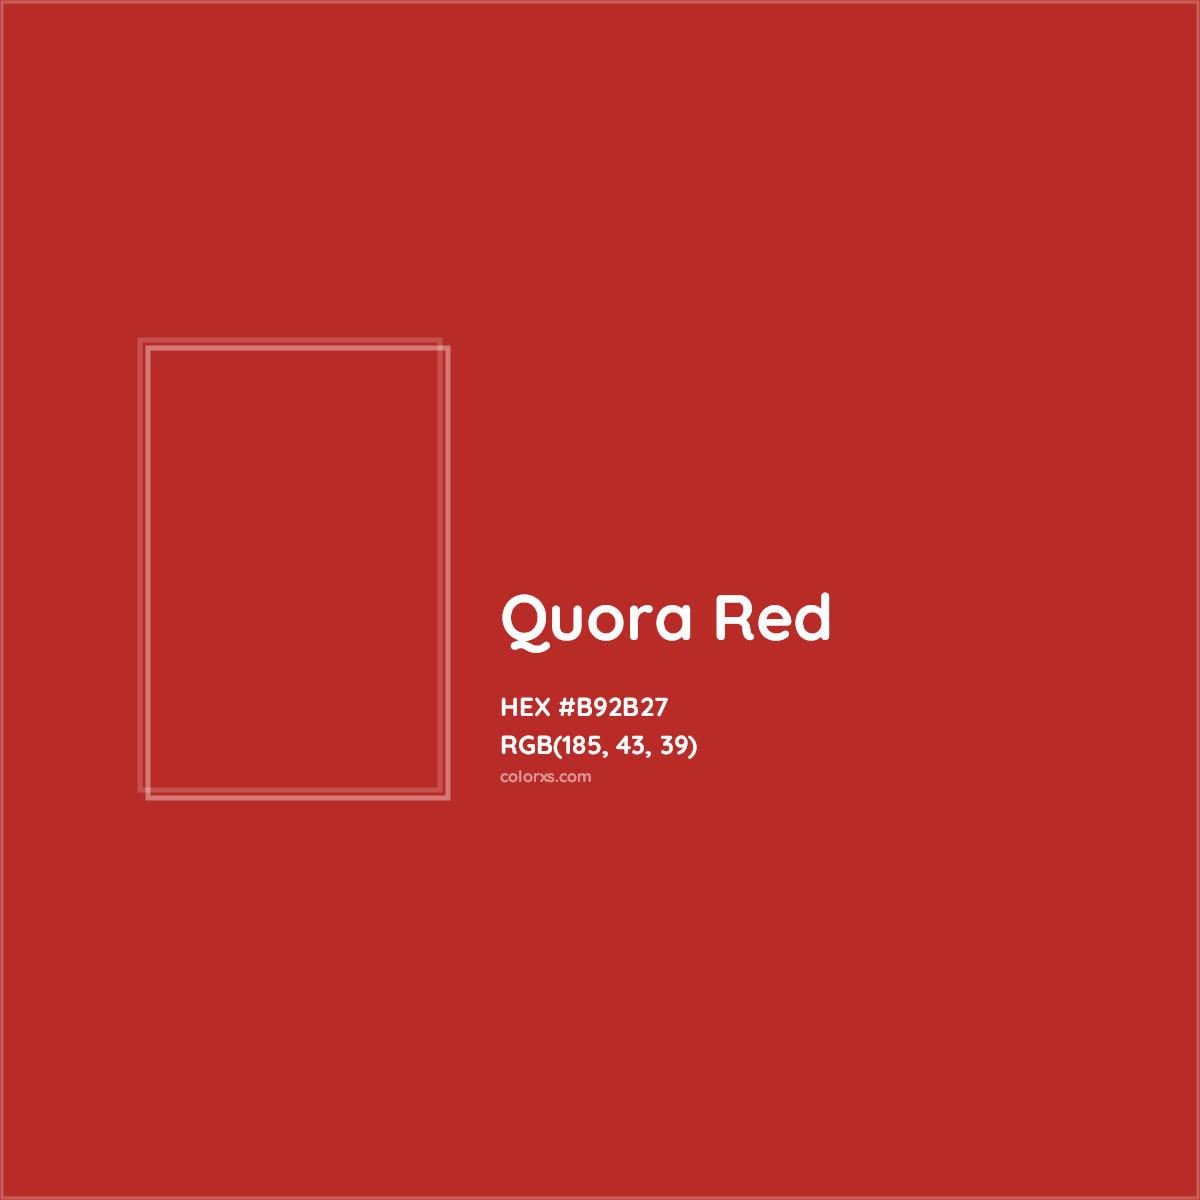 HEX #B92B27 Quora Red Other Brand - Color Code